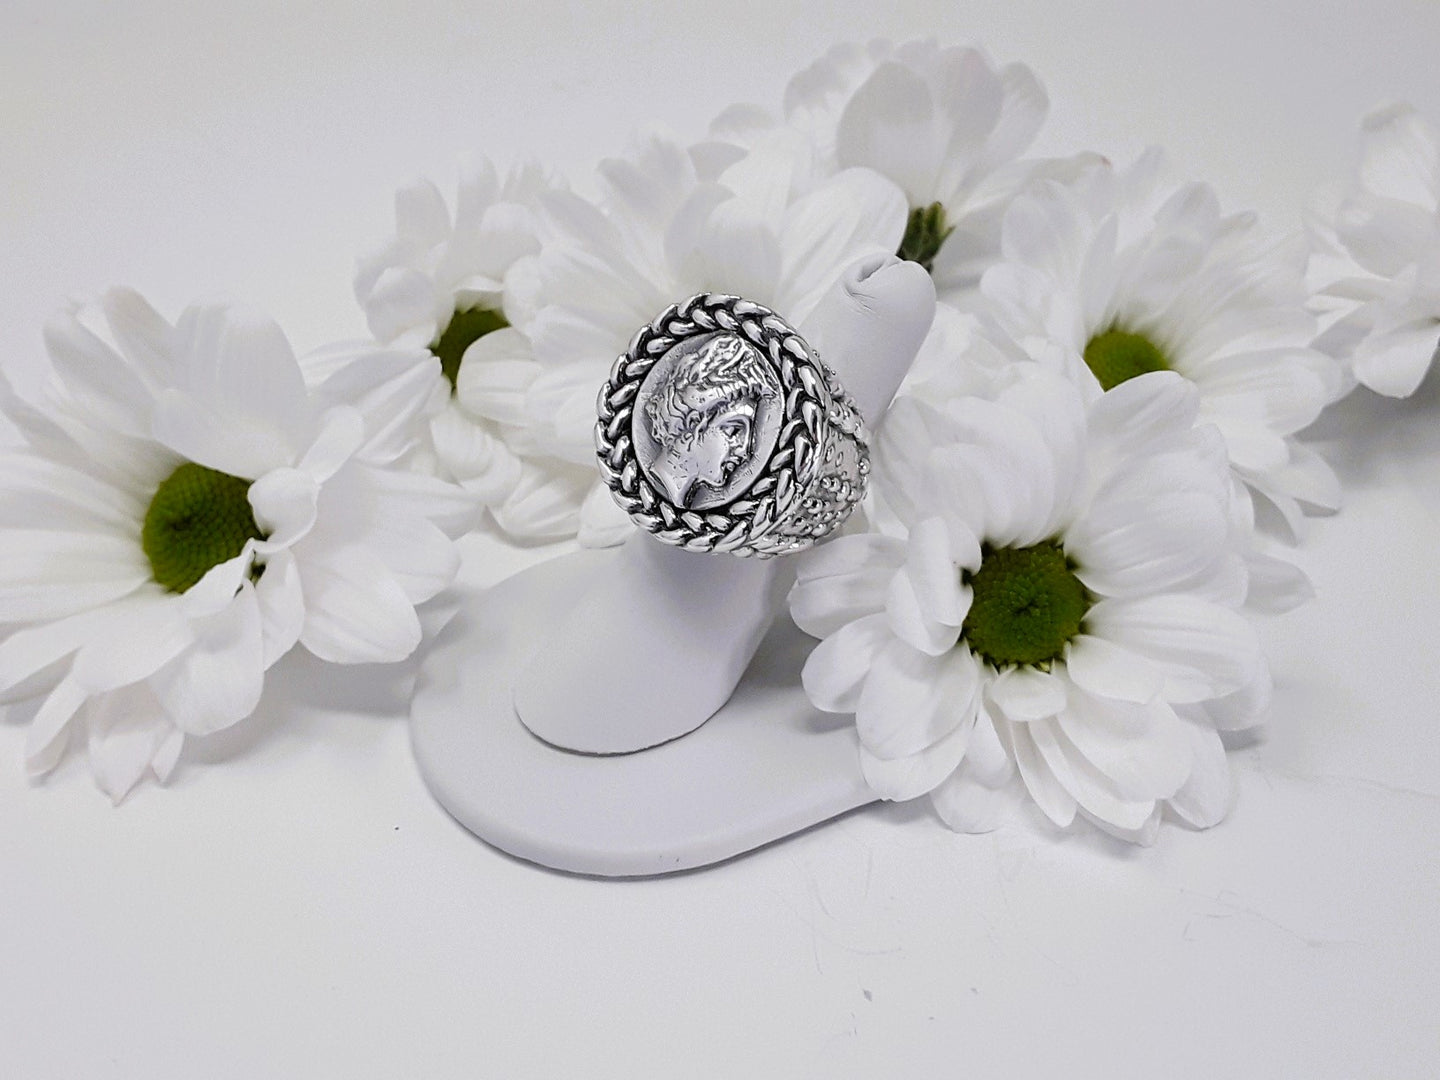 rs7545 - Caviar Coin Ring All Sterling